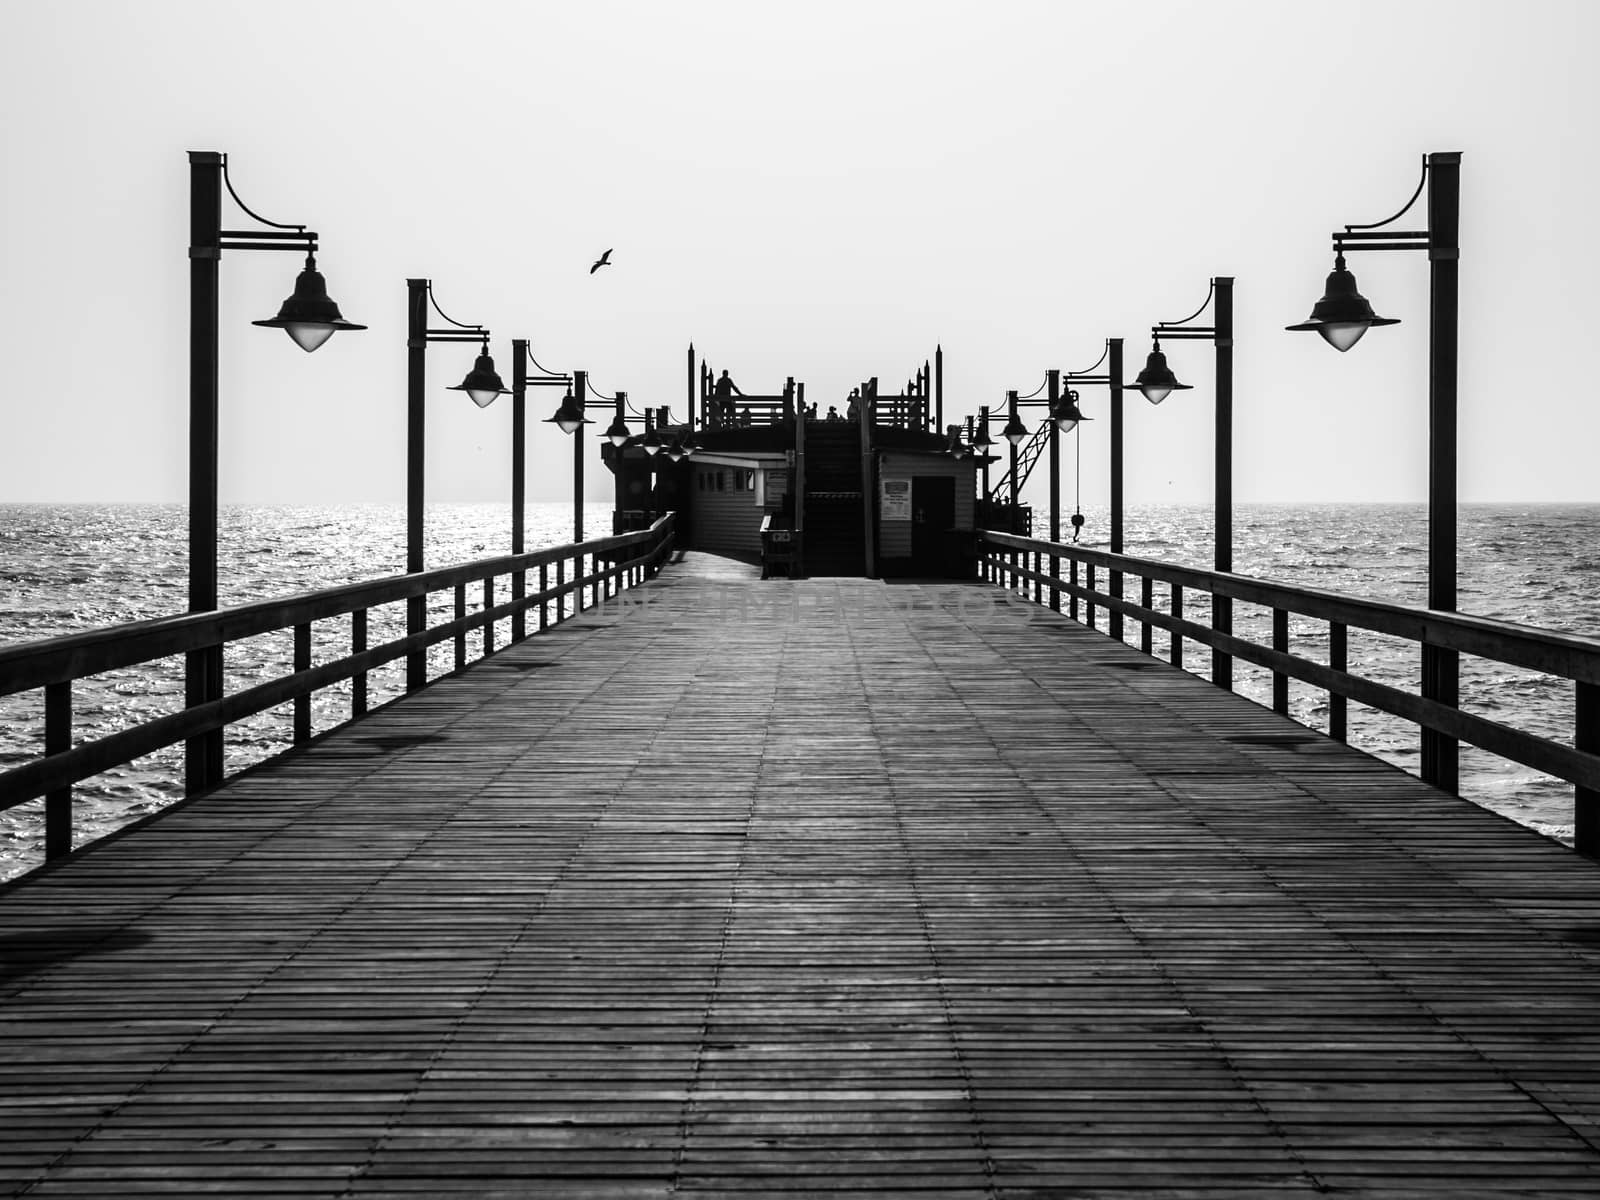 Pier with lamps in black and white (Swakopmund, Namibia)